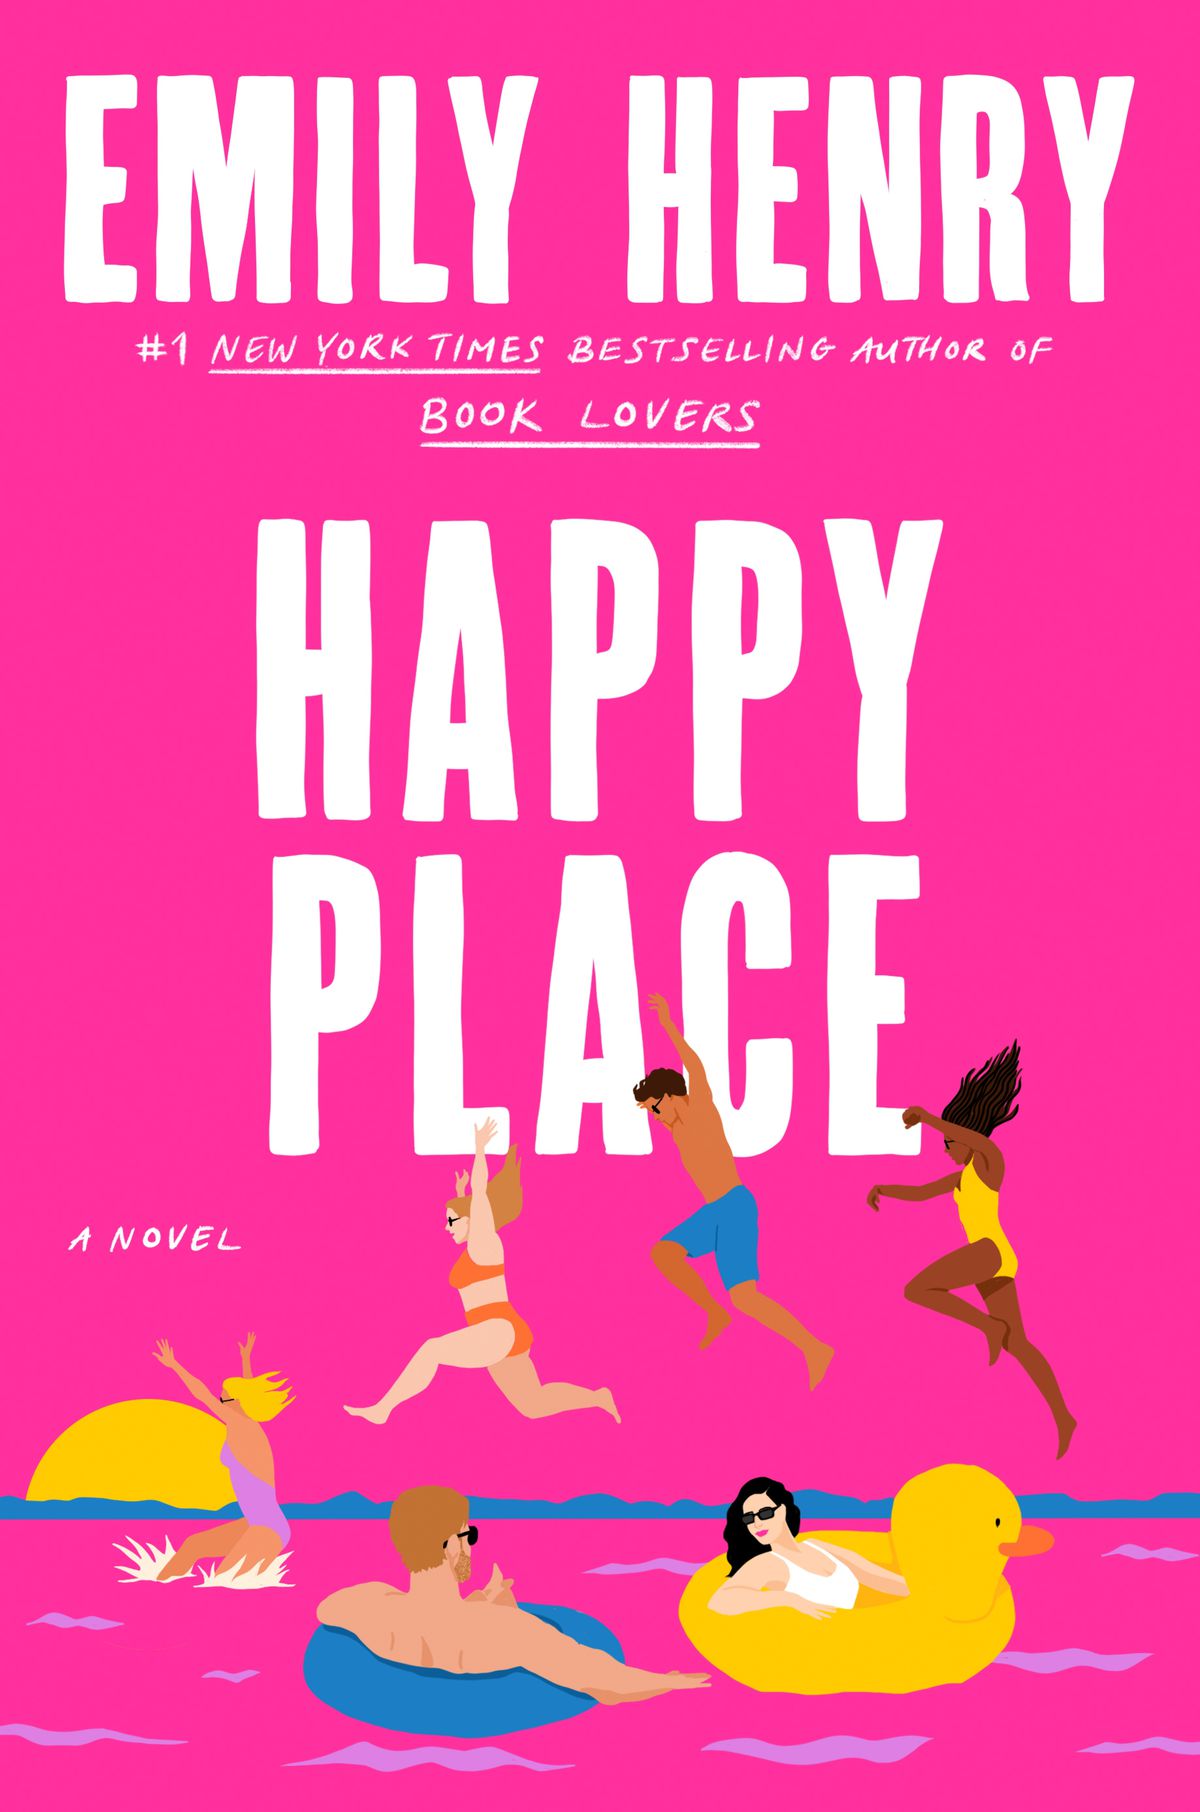 Cover art for Emily Henry’s Happy Place. The cover is pink, with a group of people jumping into the ocean with the sun on the horizon. Two people are in the foreground on floats.